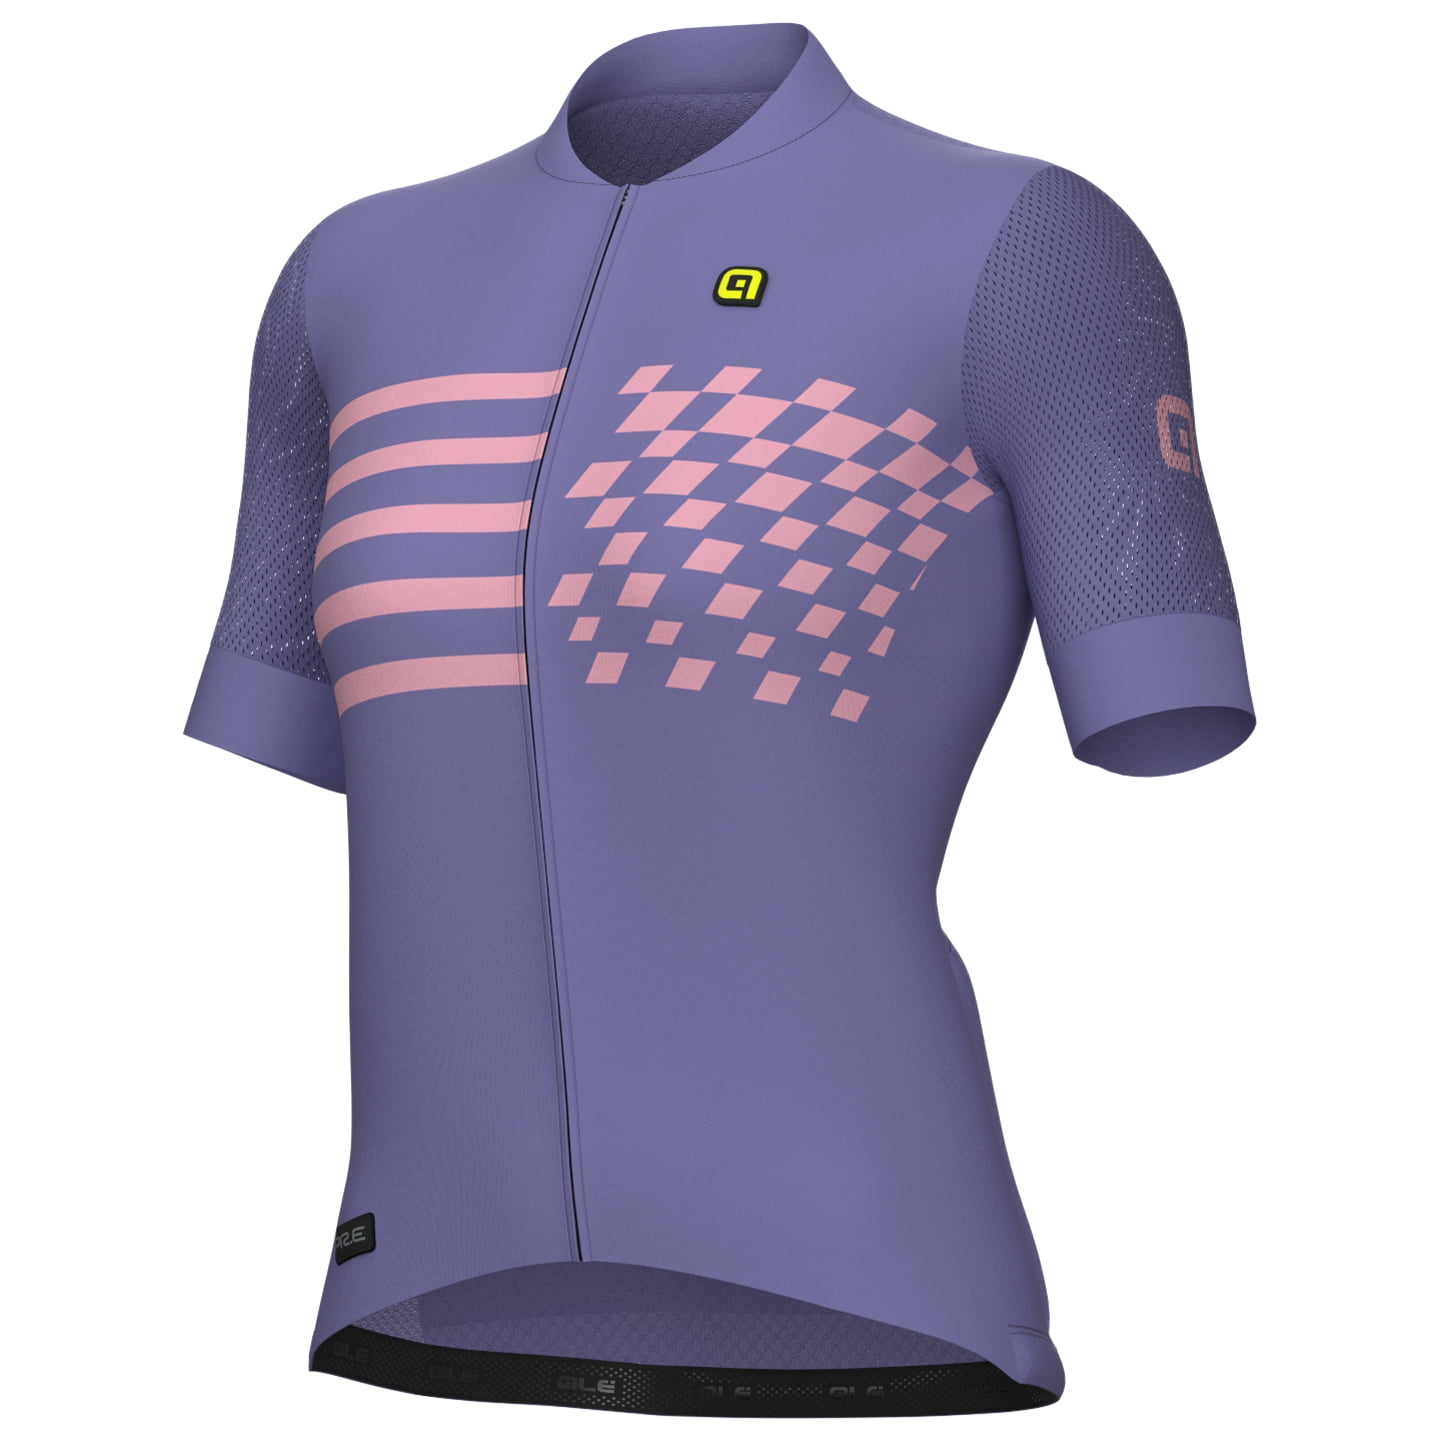 ALE Play Women’s Jersey Women’s Short Sleeve Jersey, size L, Cycling jersey, Cycling clothing